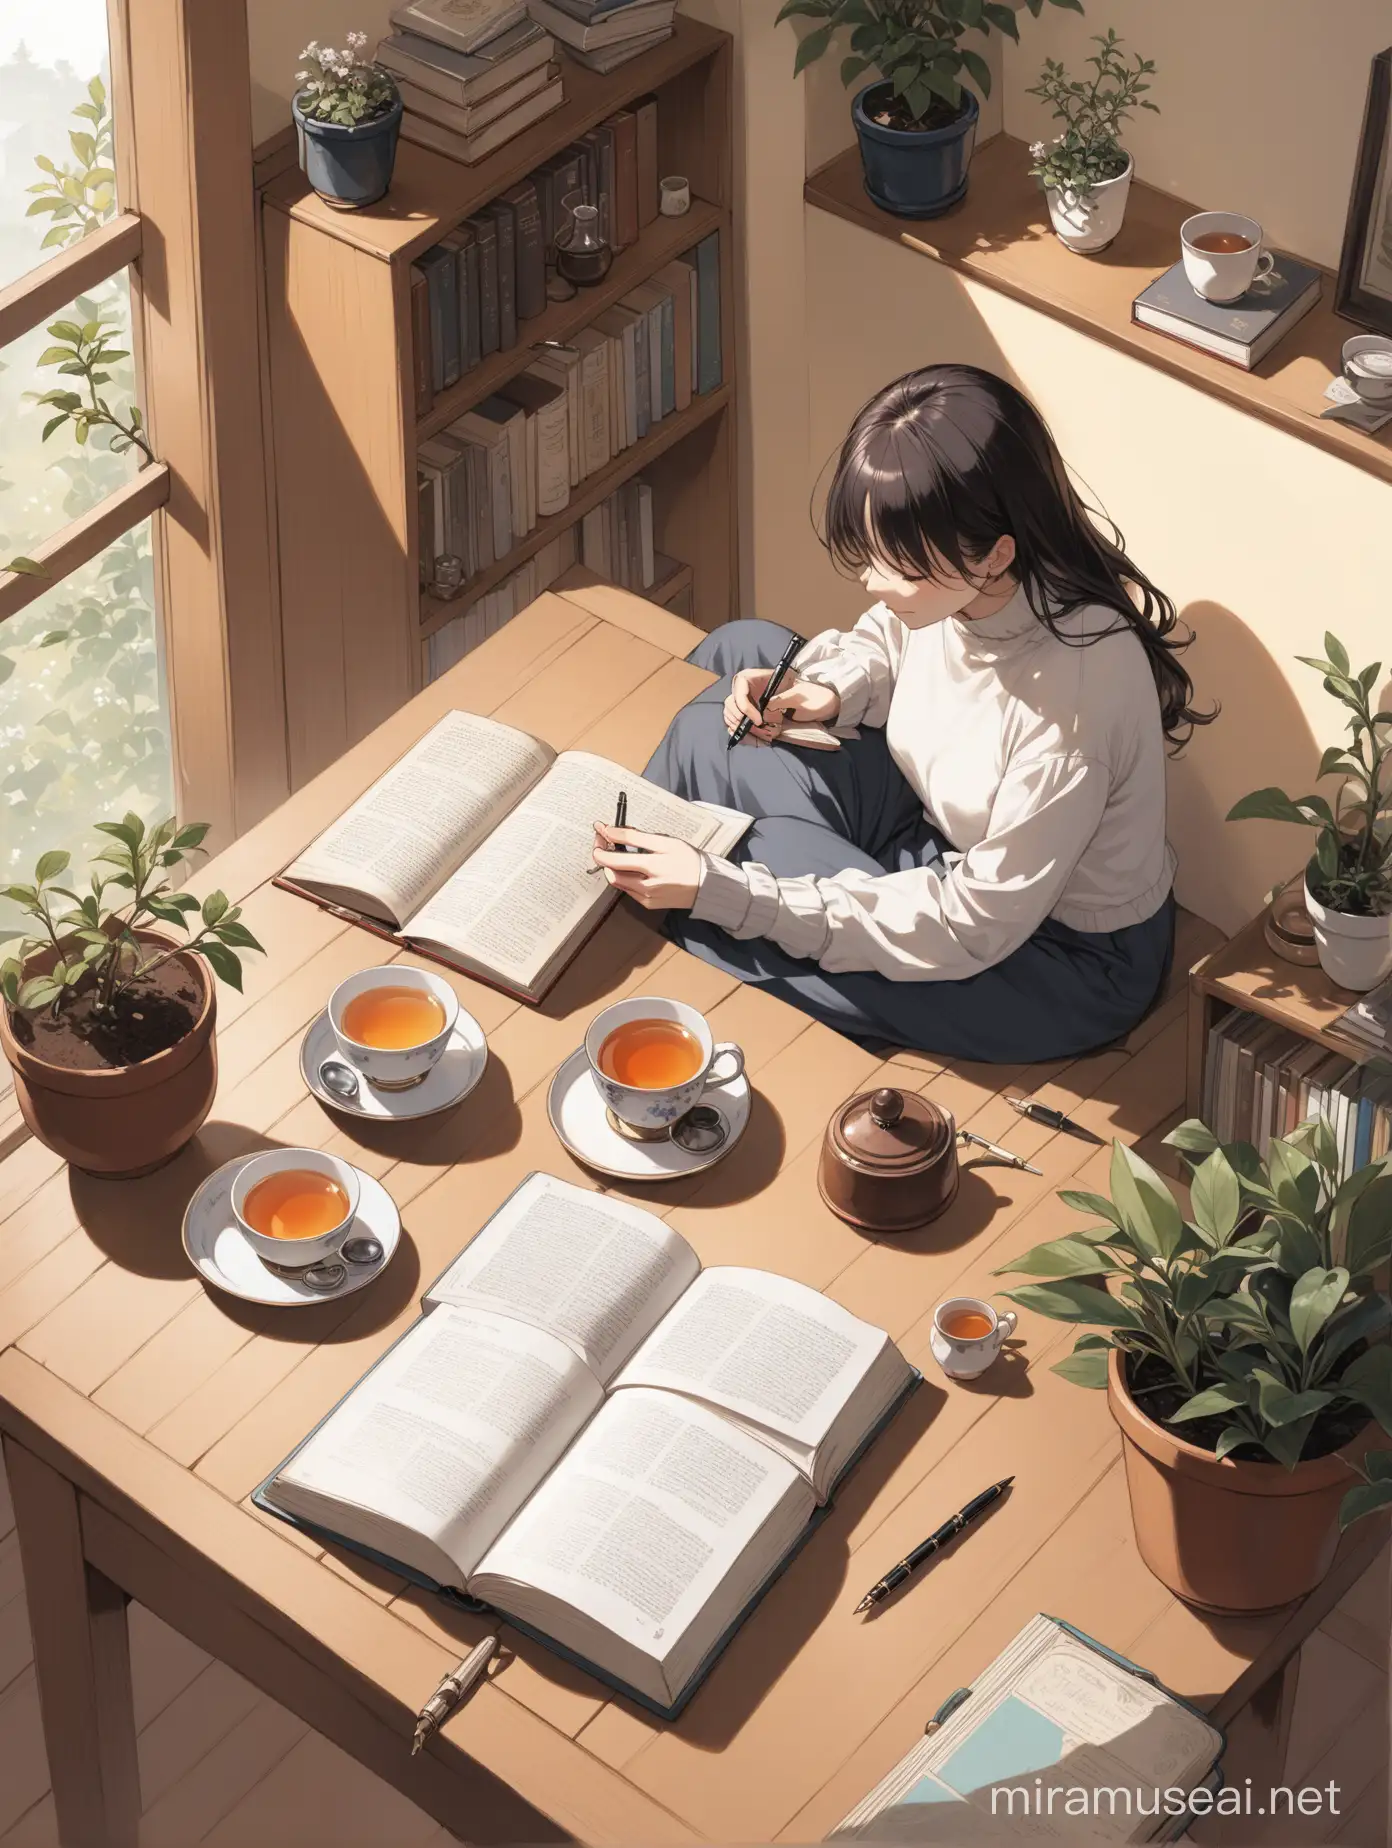 a person sitting in a cozy room, surrounded by everyday objects: one cup of tea, a book, a potted plant, and a pen. 